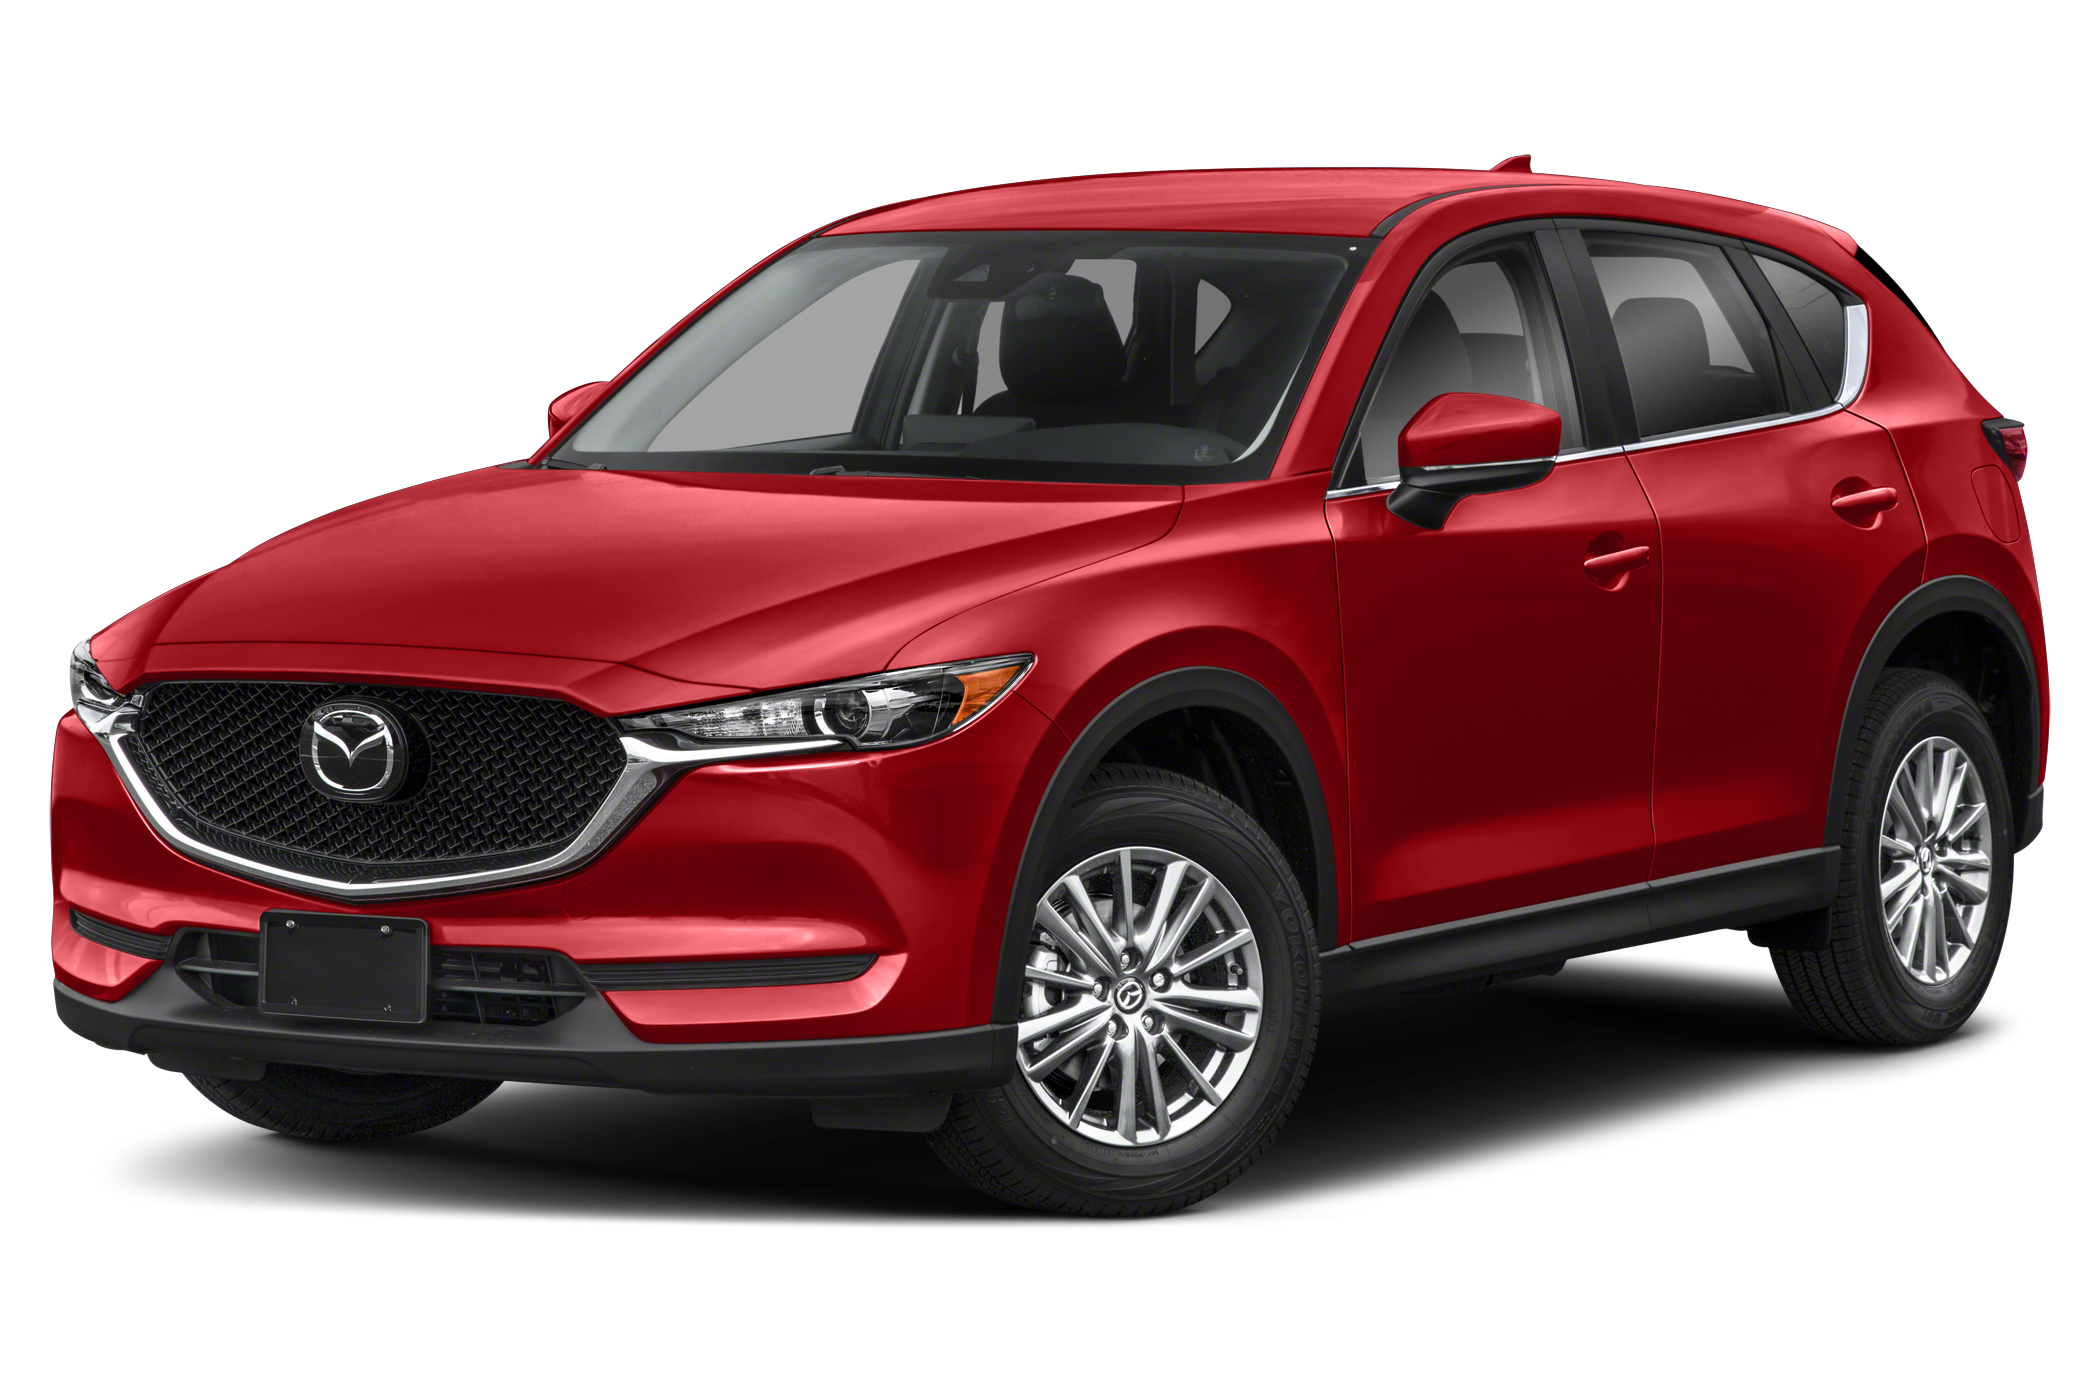 Difference Between The 2021 Mazda CX-5 Sport and CX-5 Touring